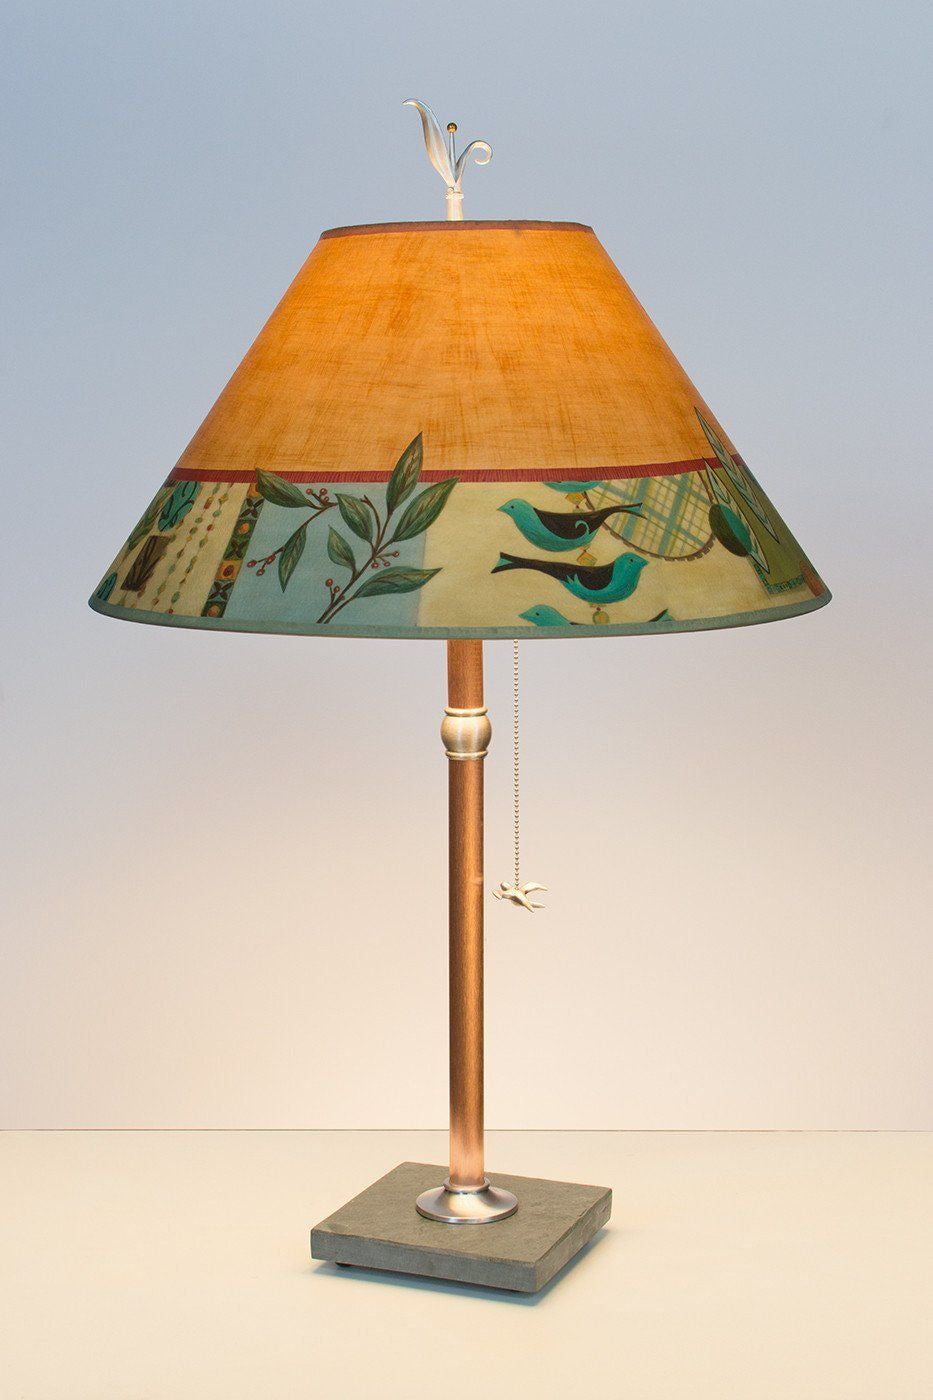 Copper Table Lamp on Vermont Slate with Large Conical Shade in New Capri Spice